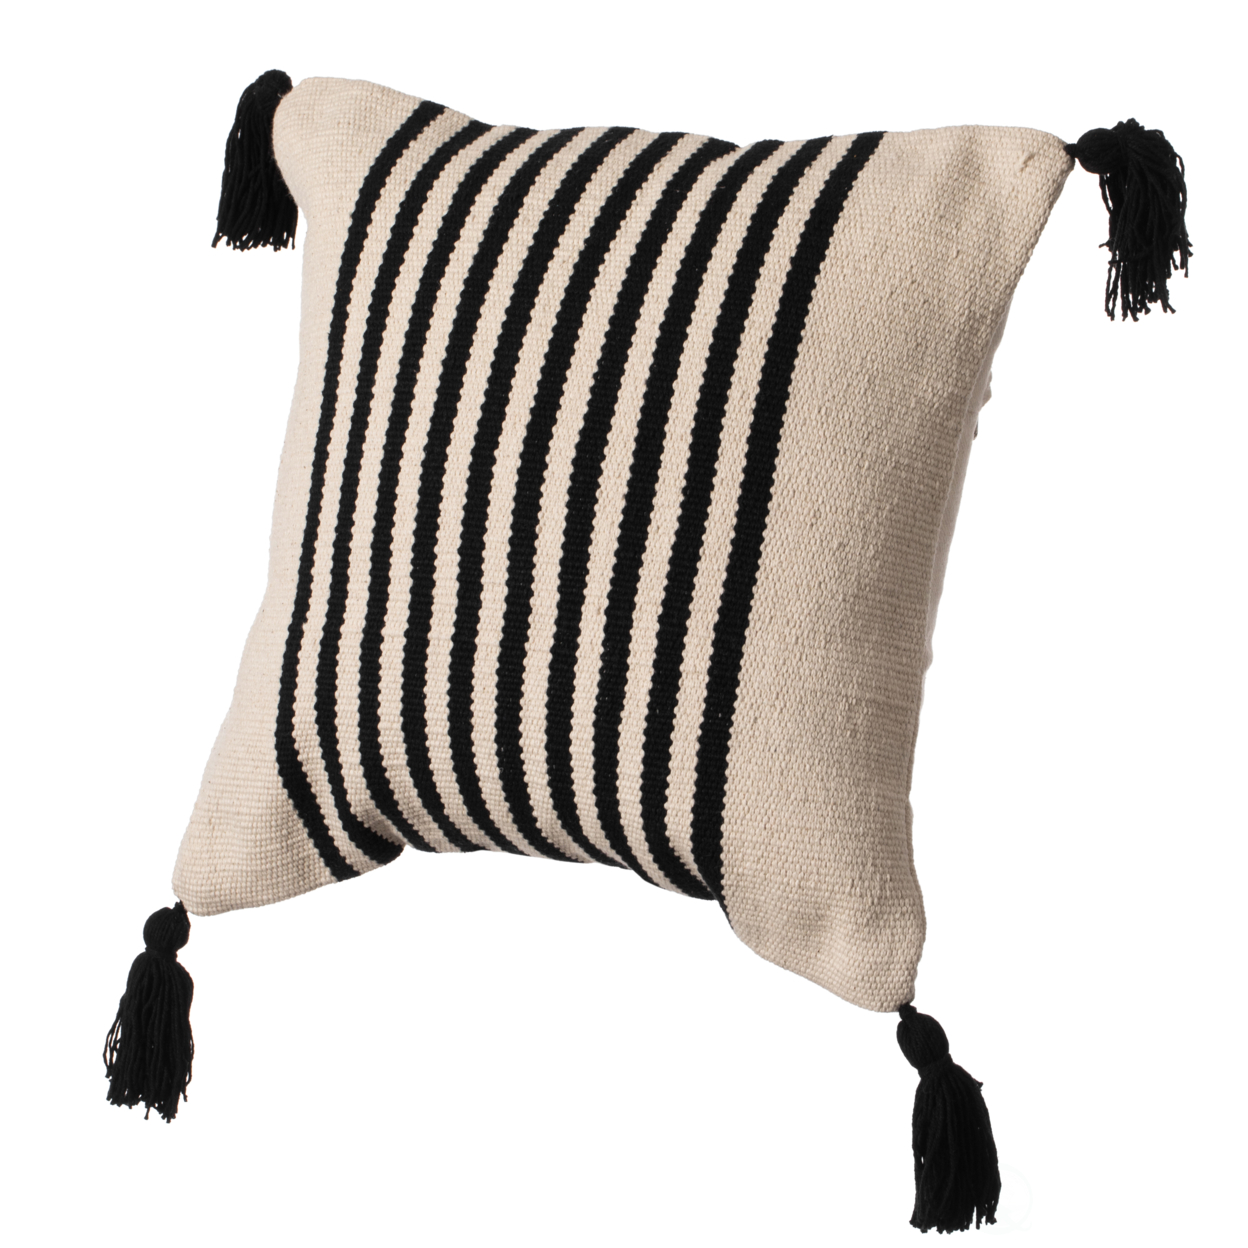 16 Handwoven Cotton Throw Pillow Cover With Striped Lines, Black - Black